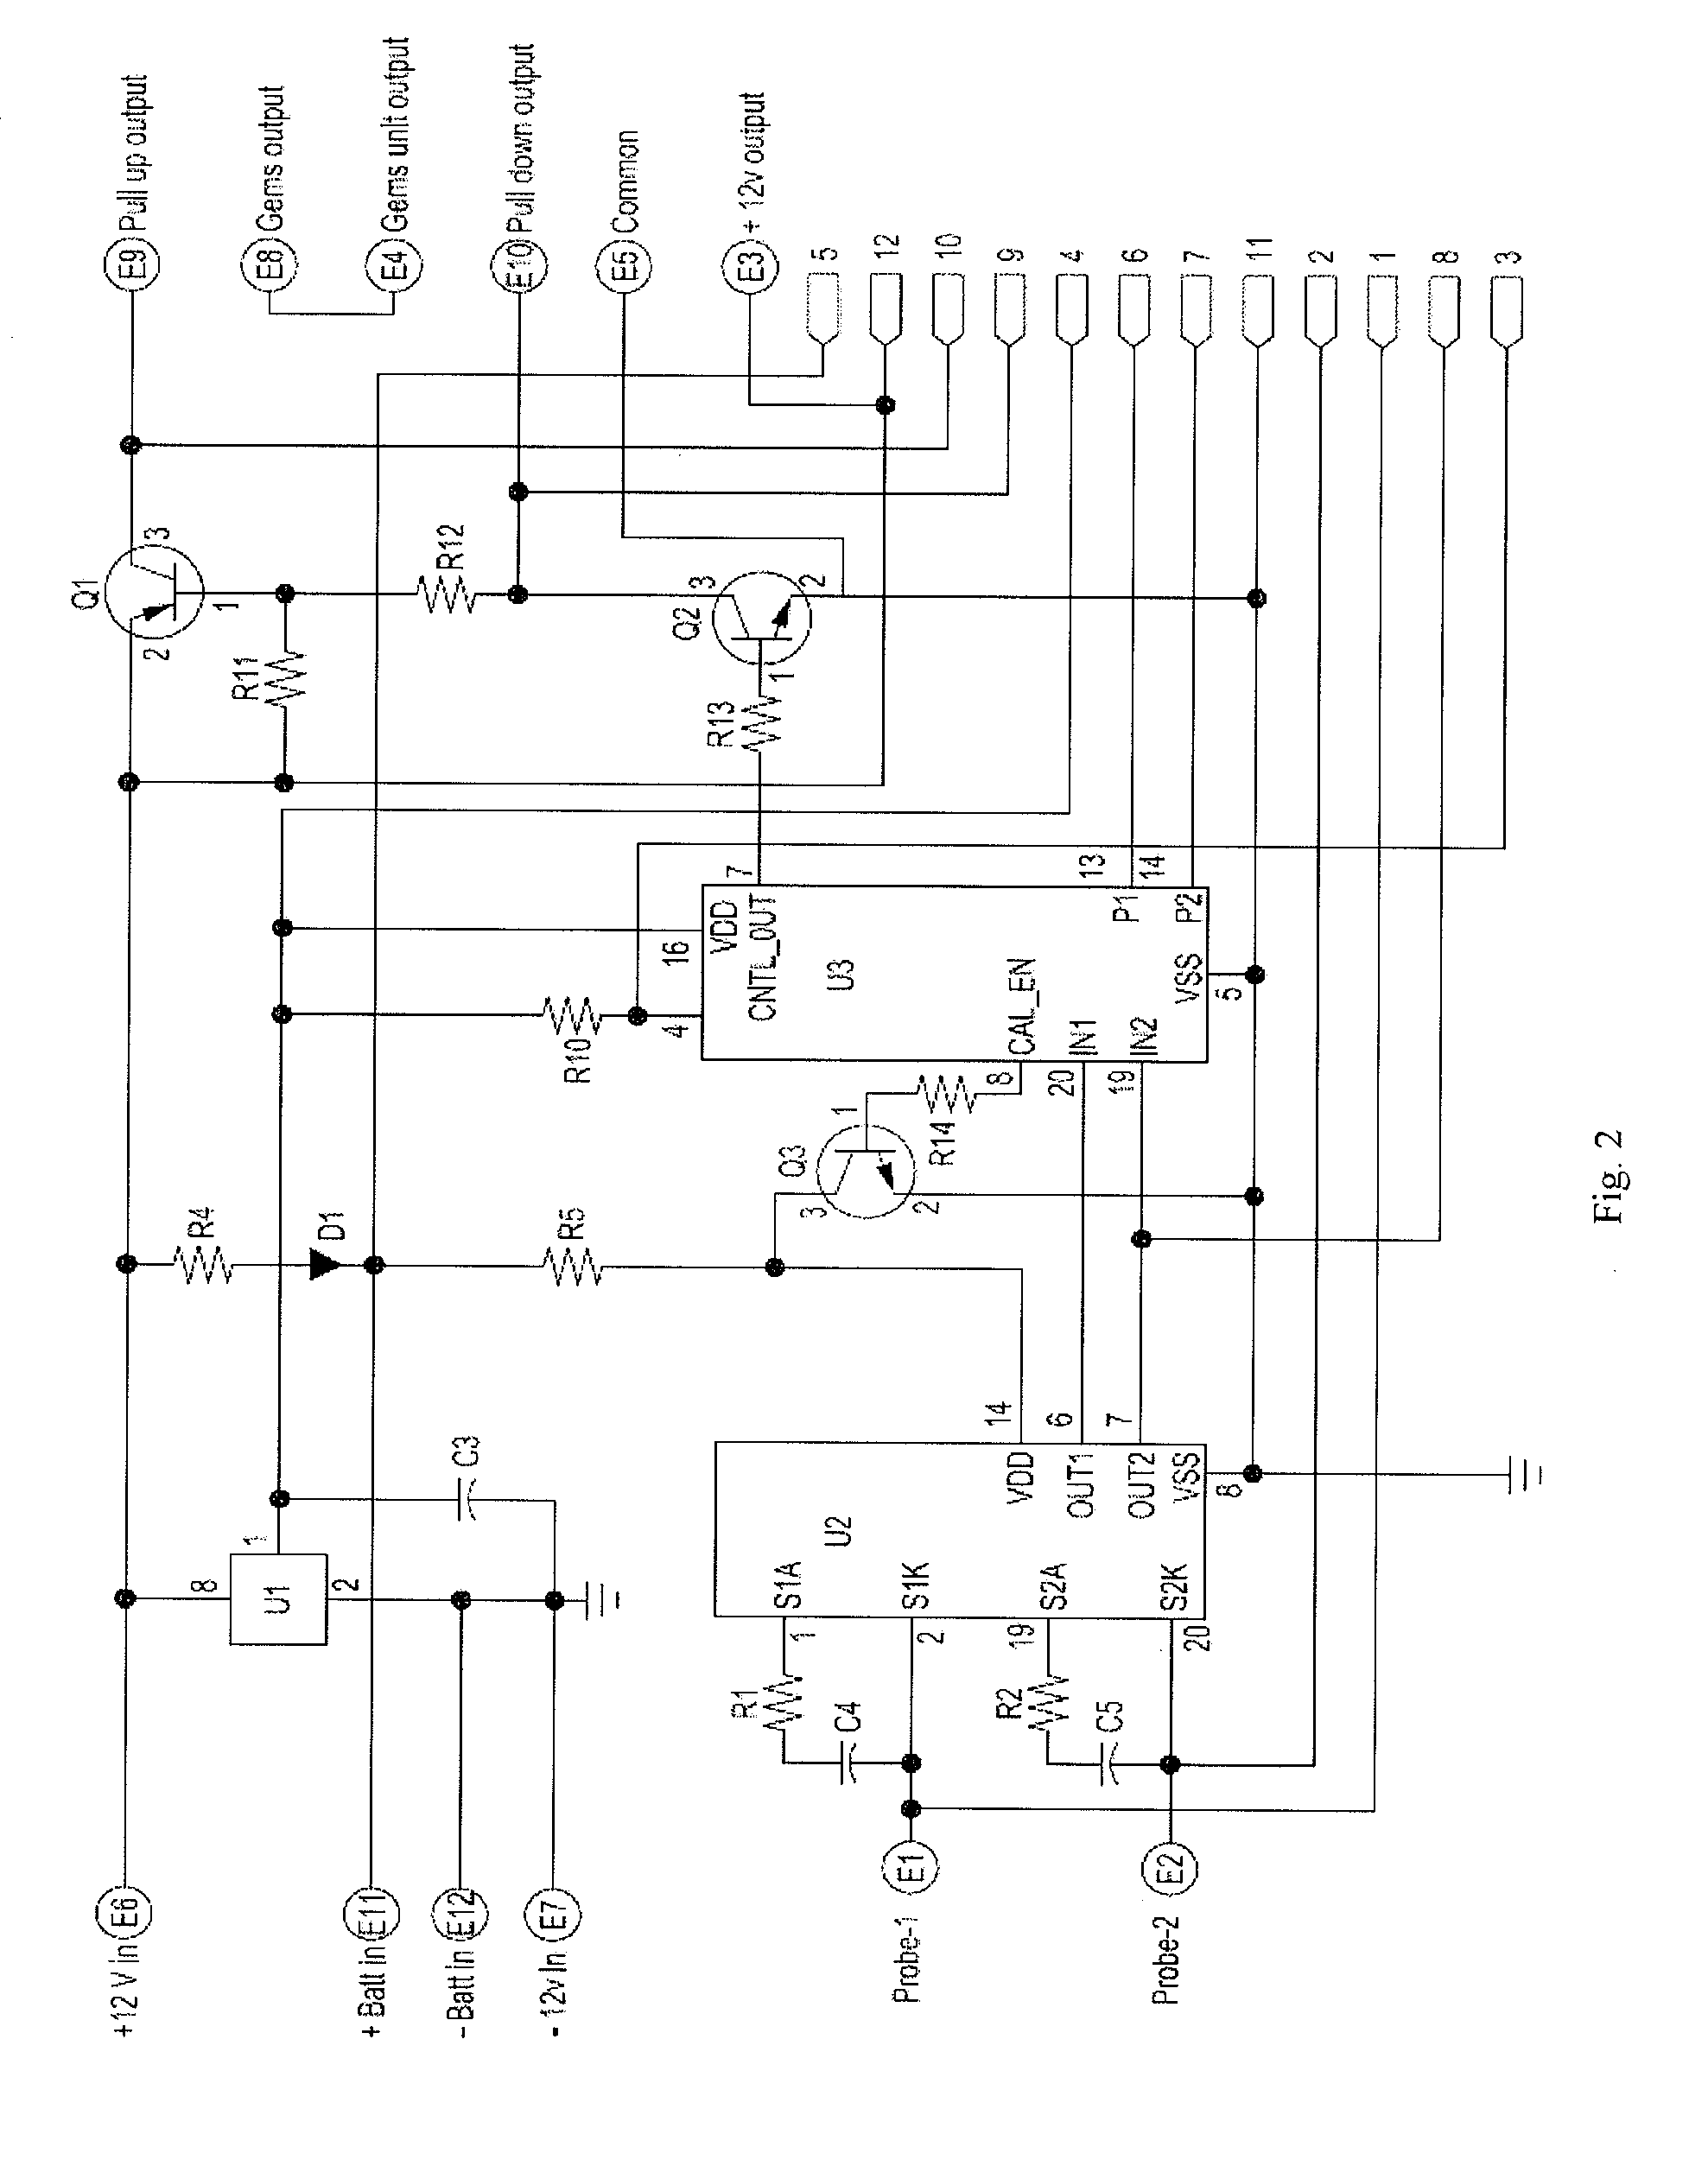 Method and apparatus for sensor calibration and adjustable pump time in a dewatering system